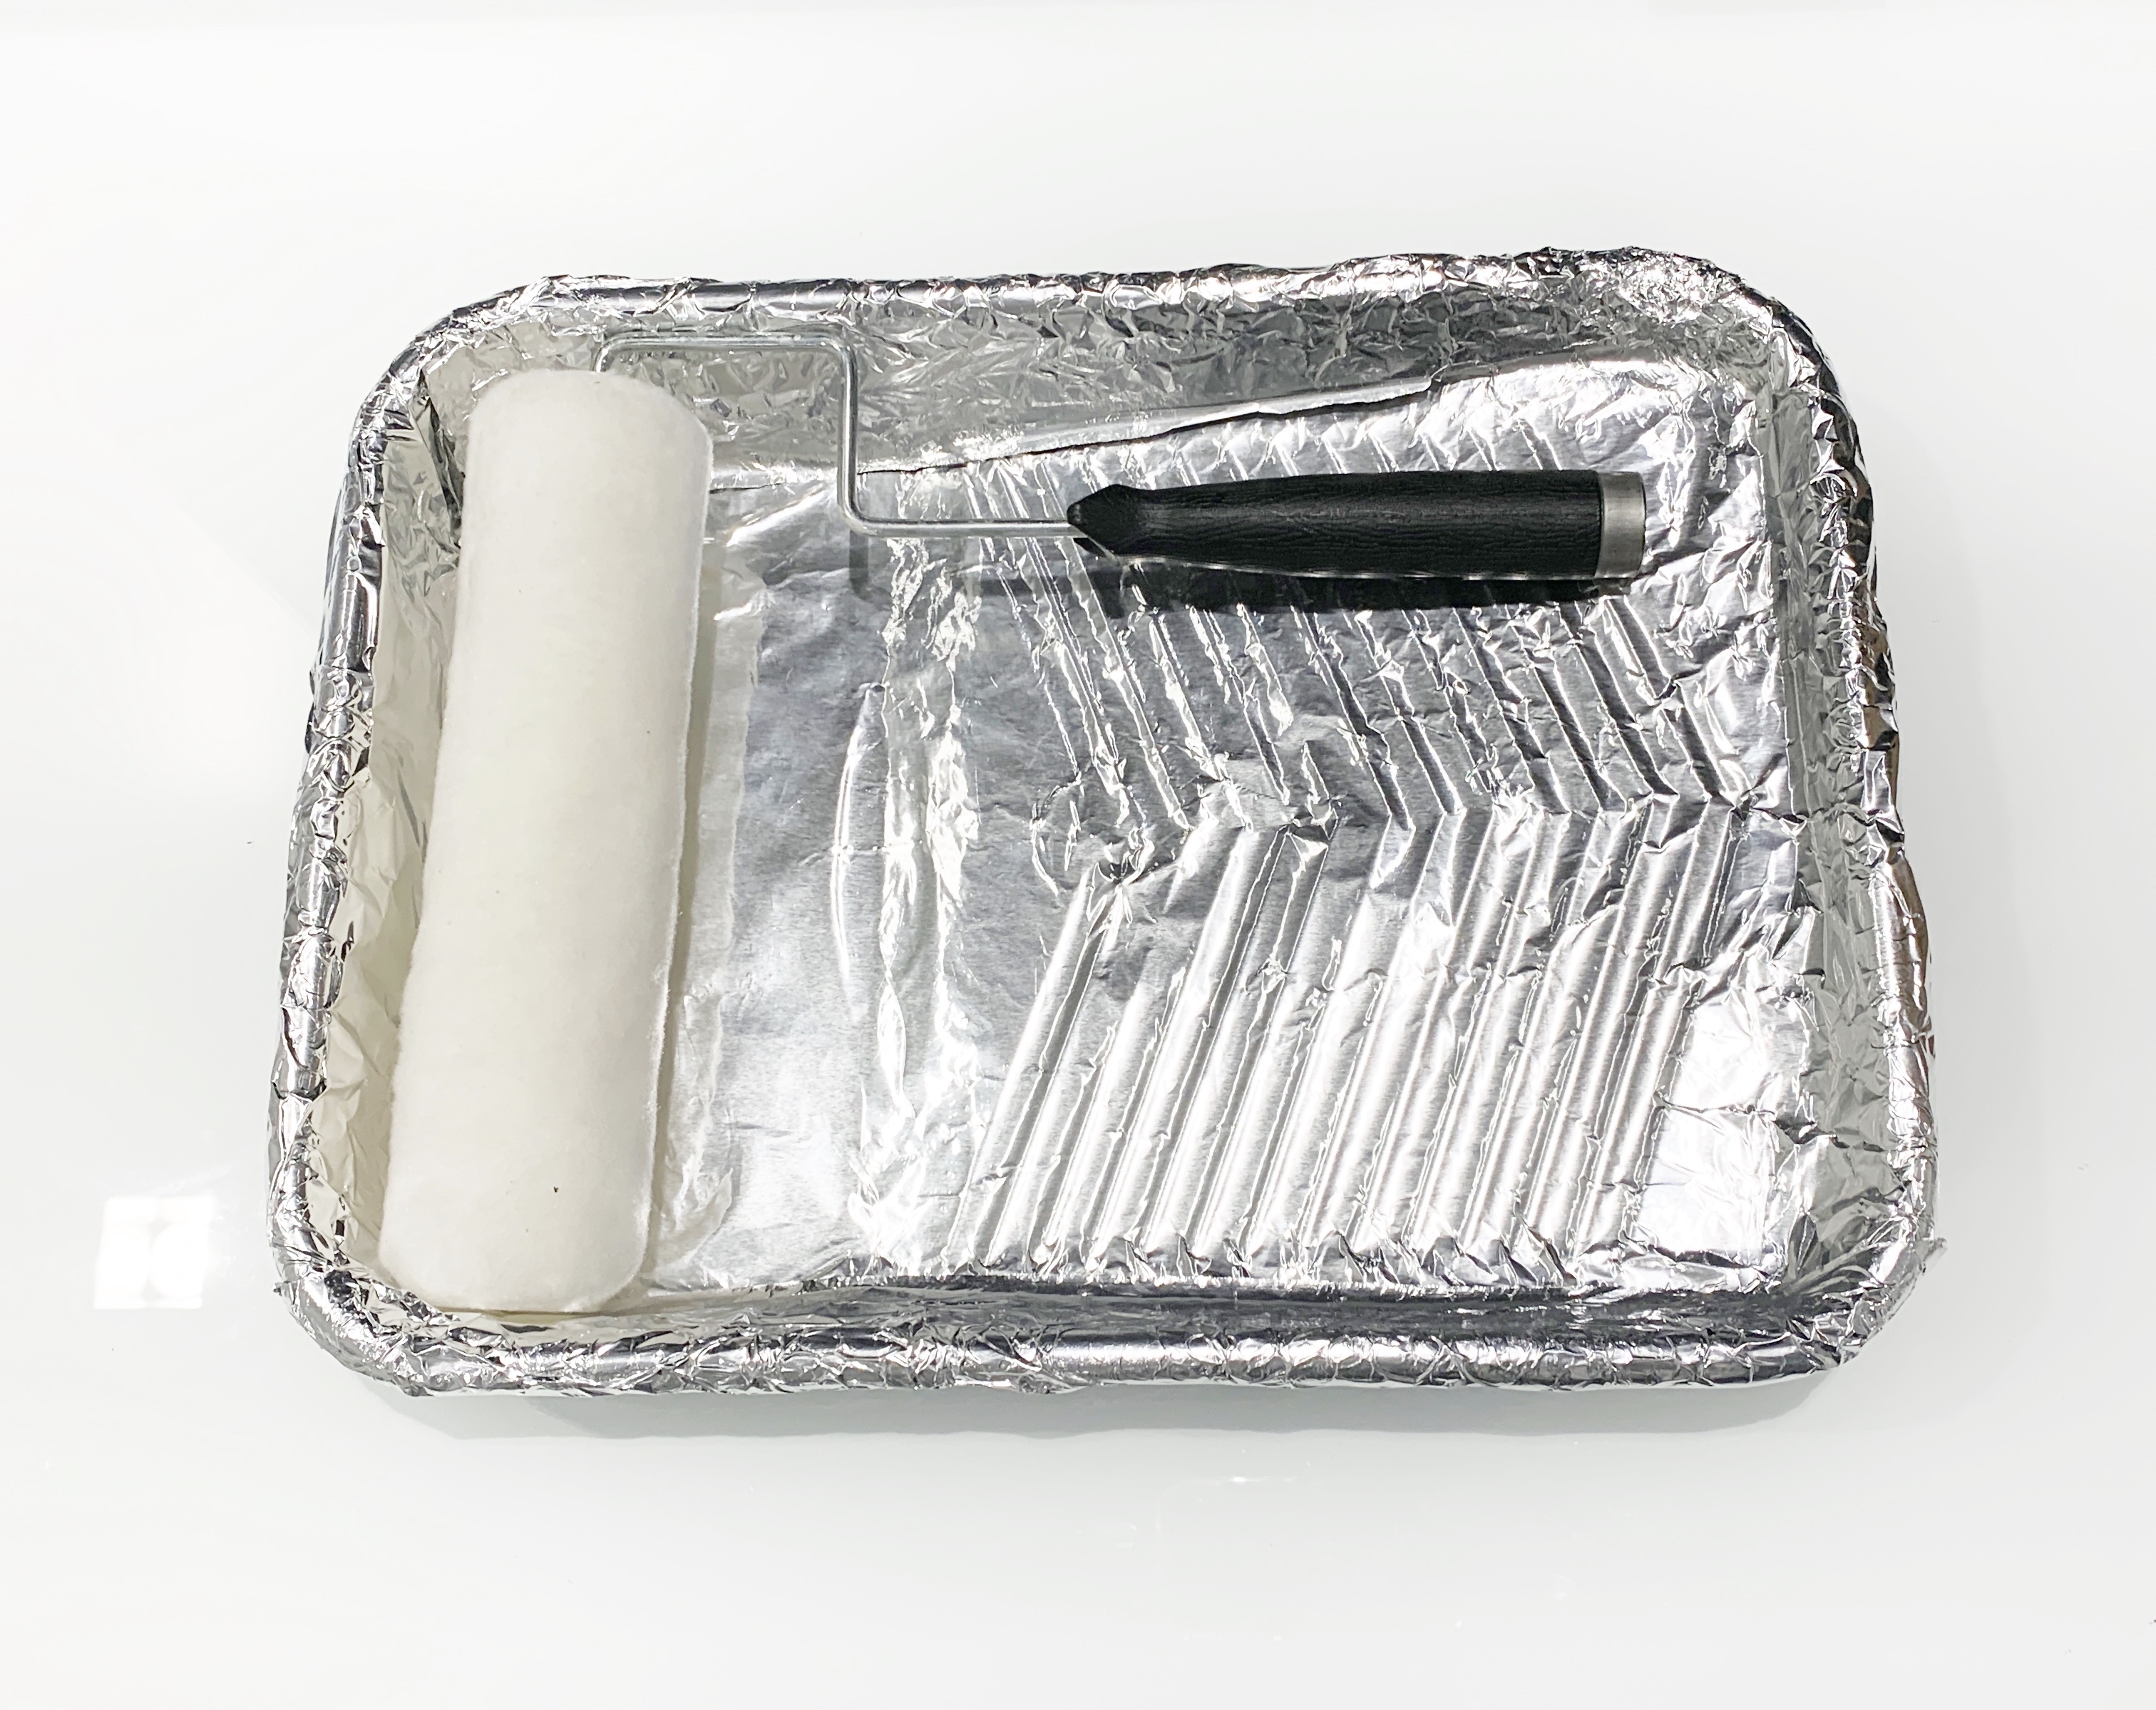 5 Ways to Use Aluminum Foil to Clean